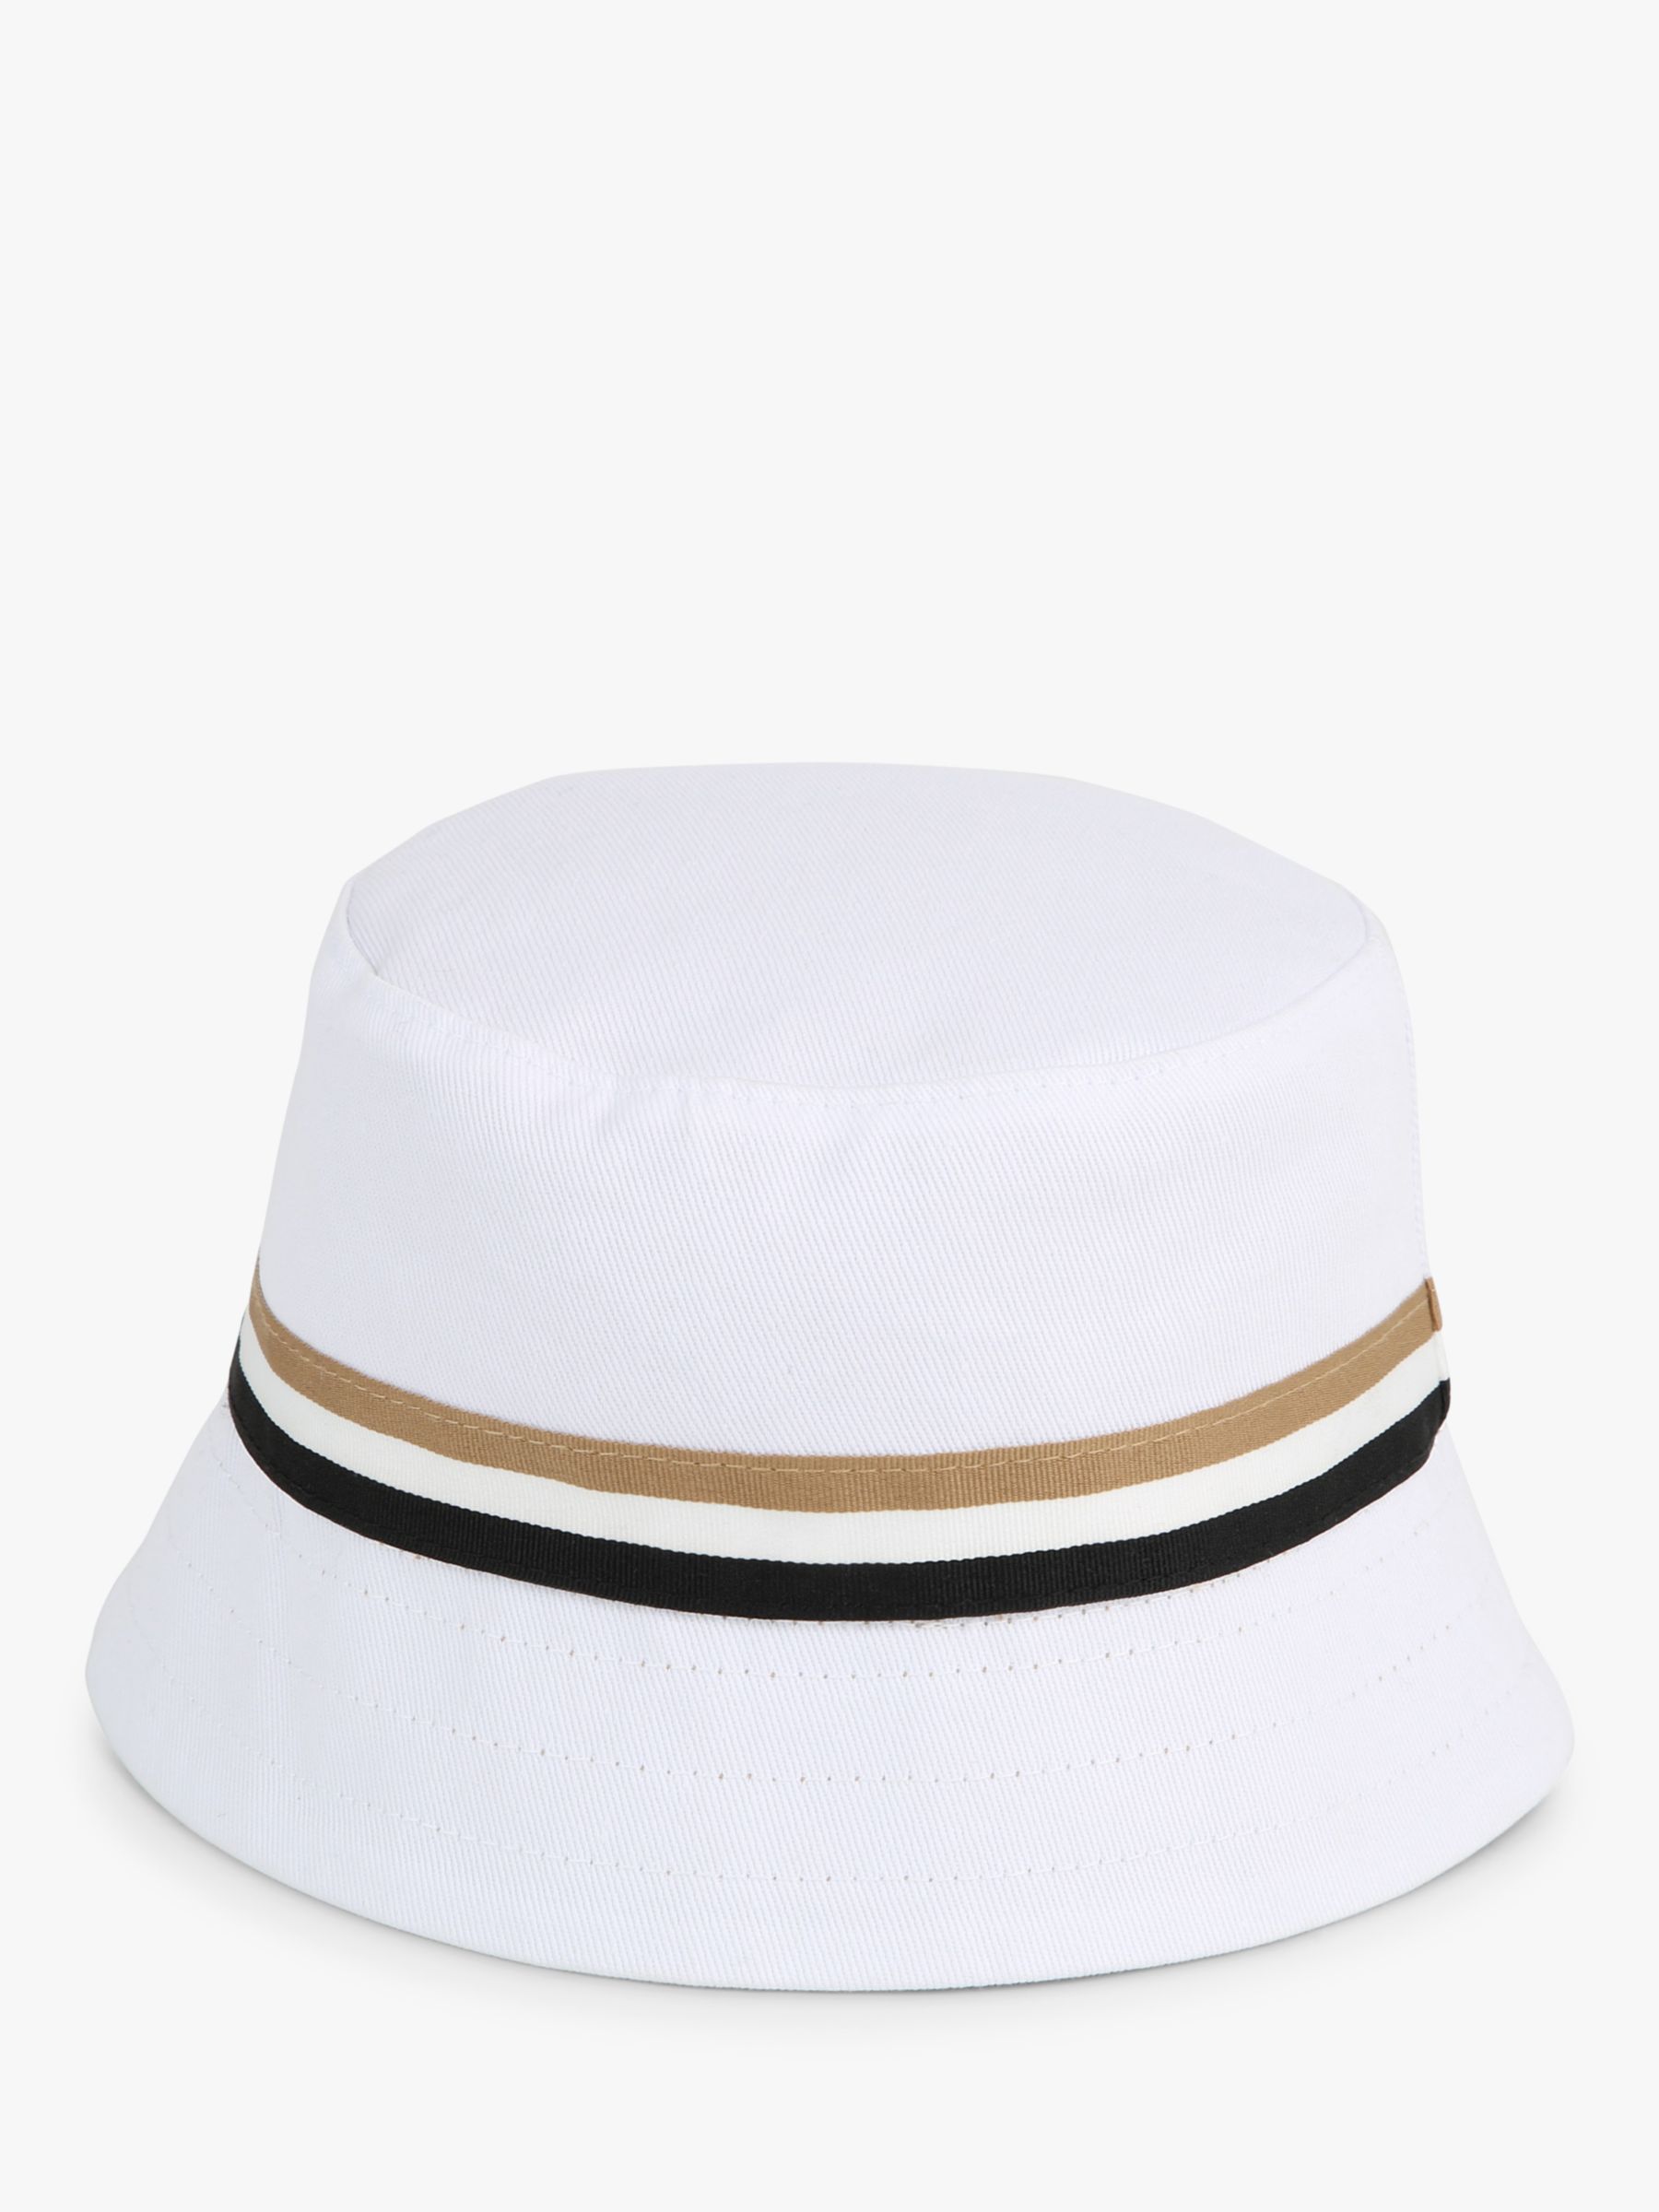 BOSS Baby Reversible Bucket Hat, White/Brown, 3-6 months